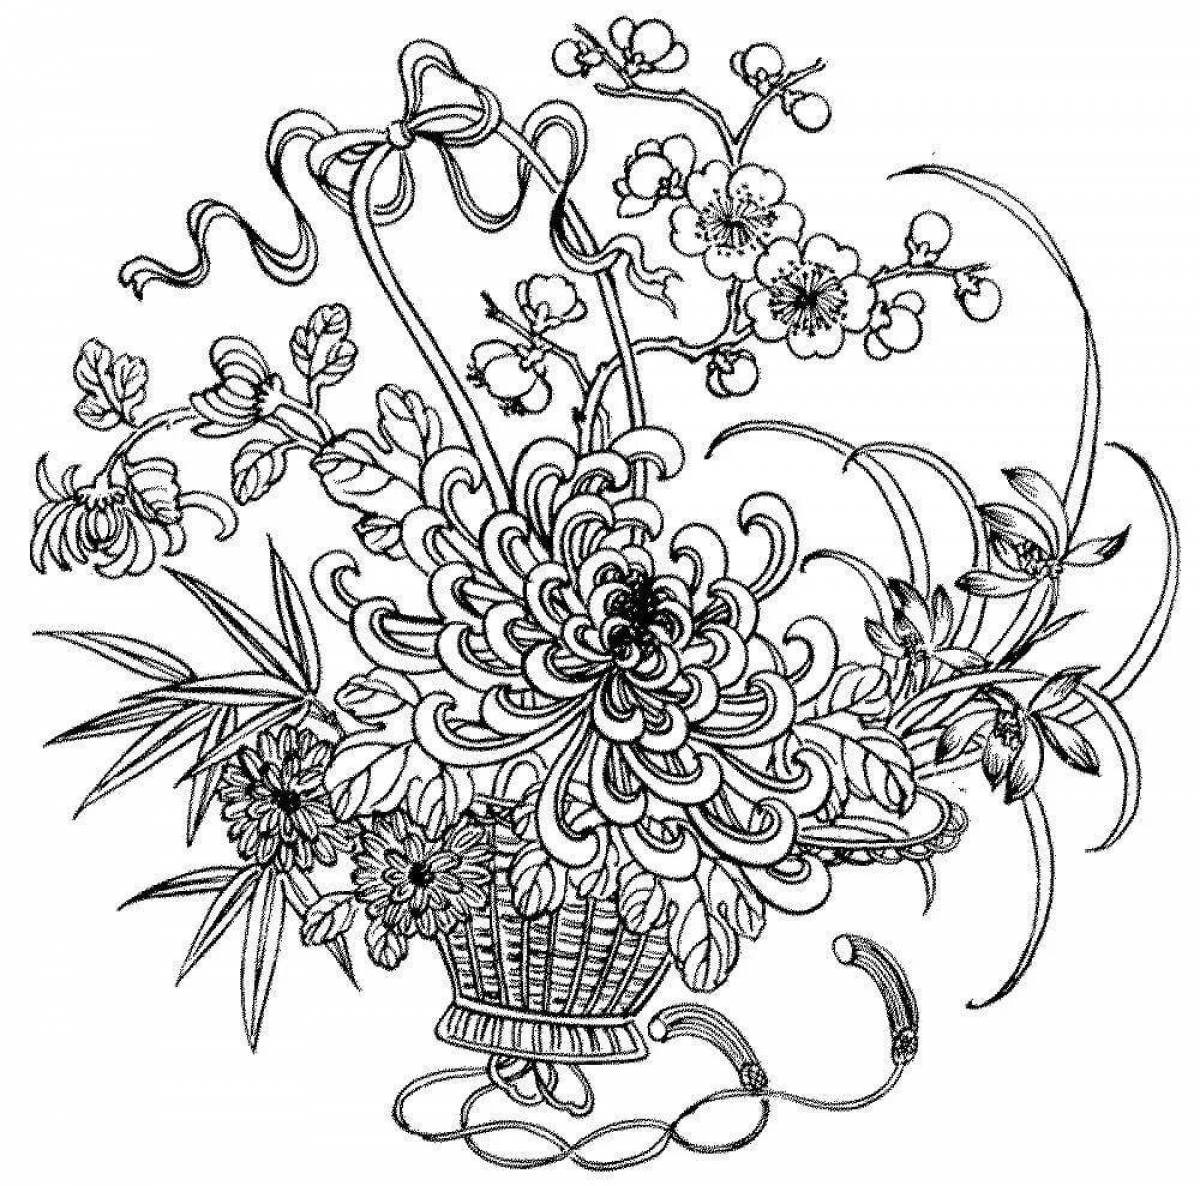 Coloring book shining compound flower